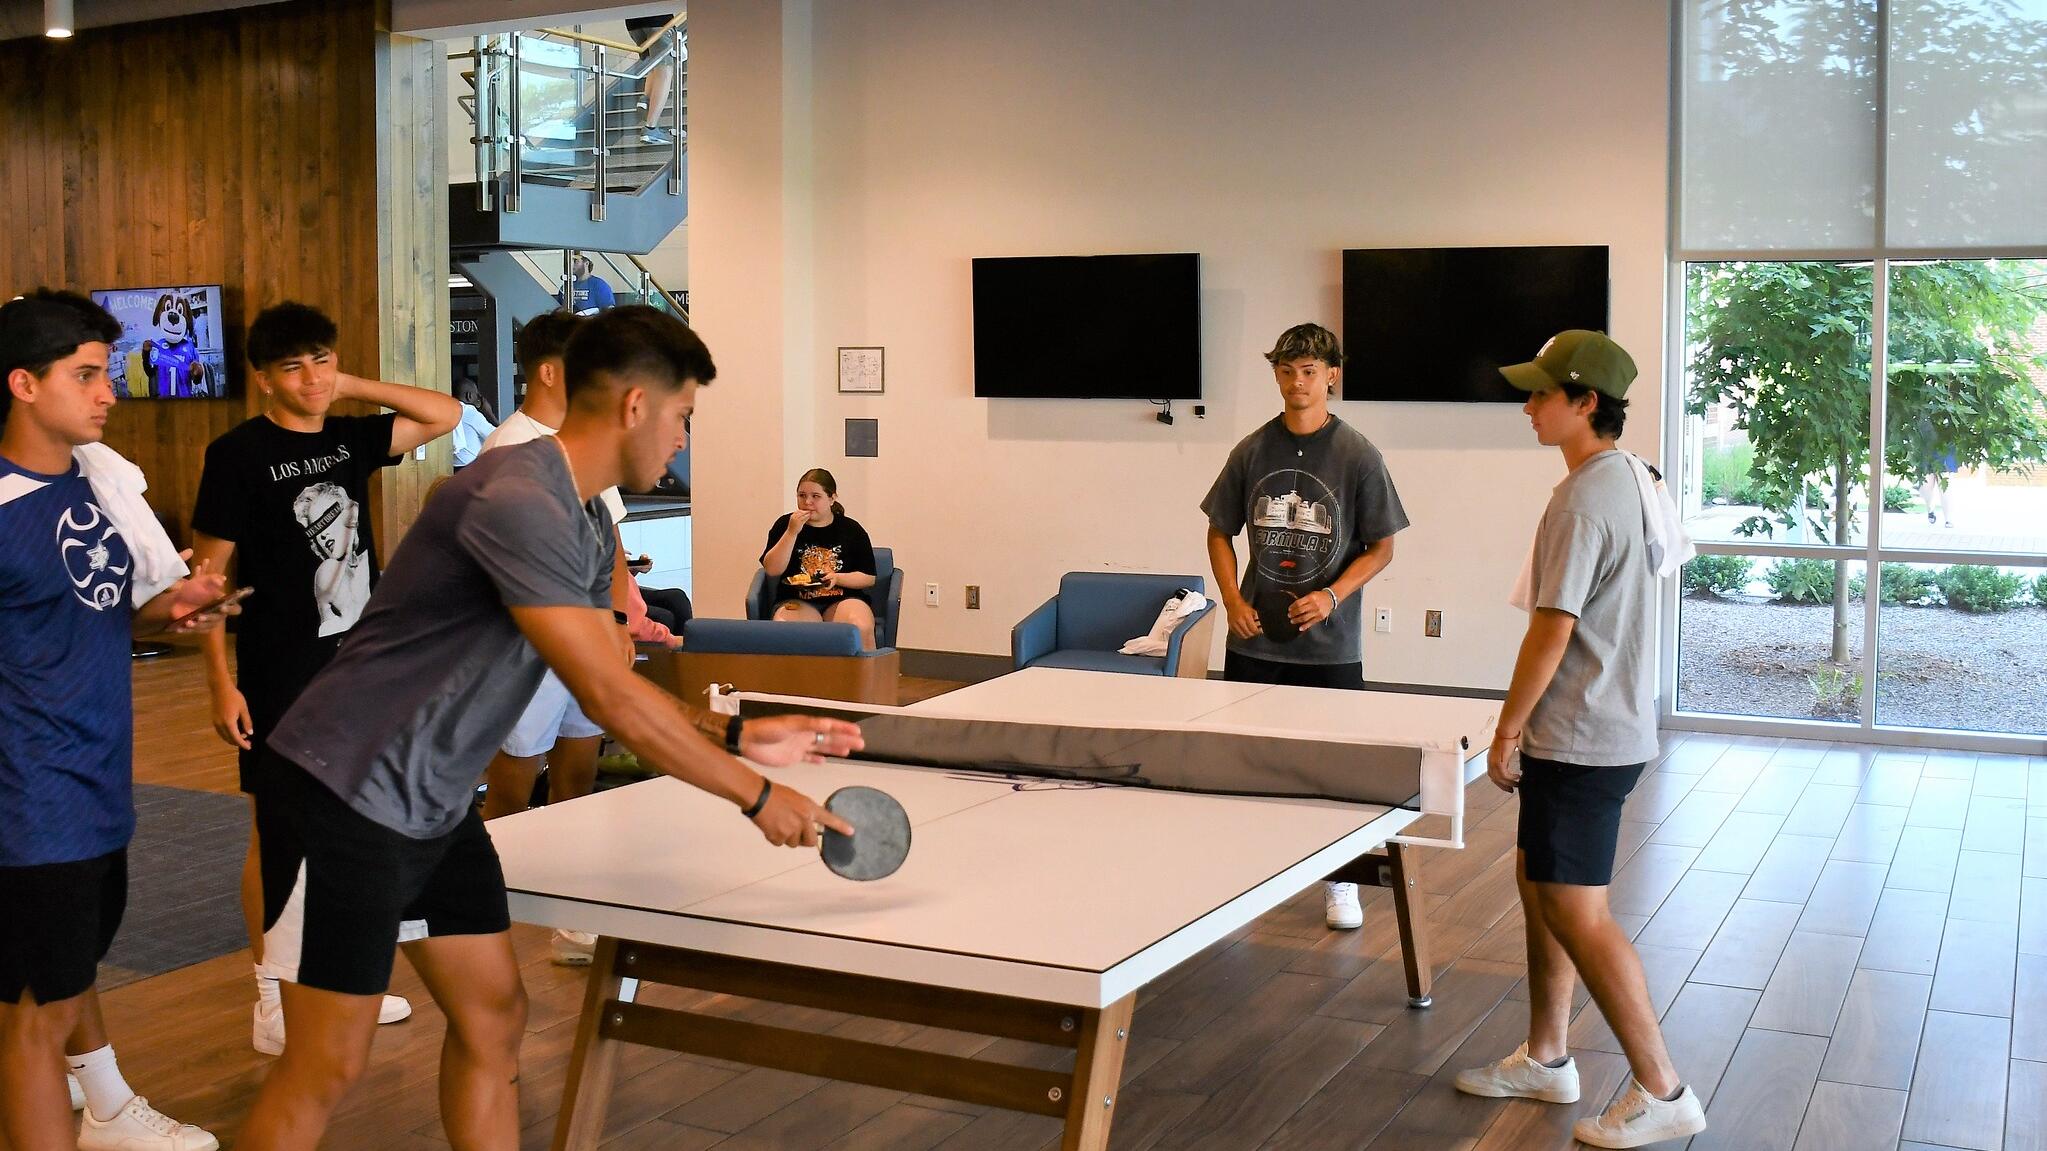 Students playing ping pong in Hines and Riggins Center